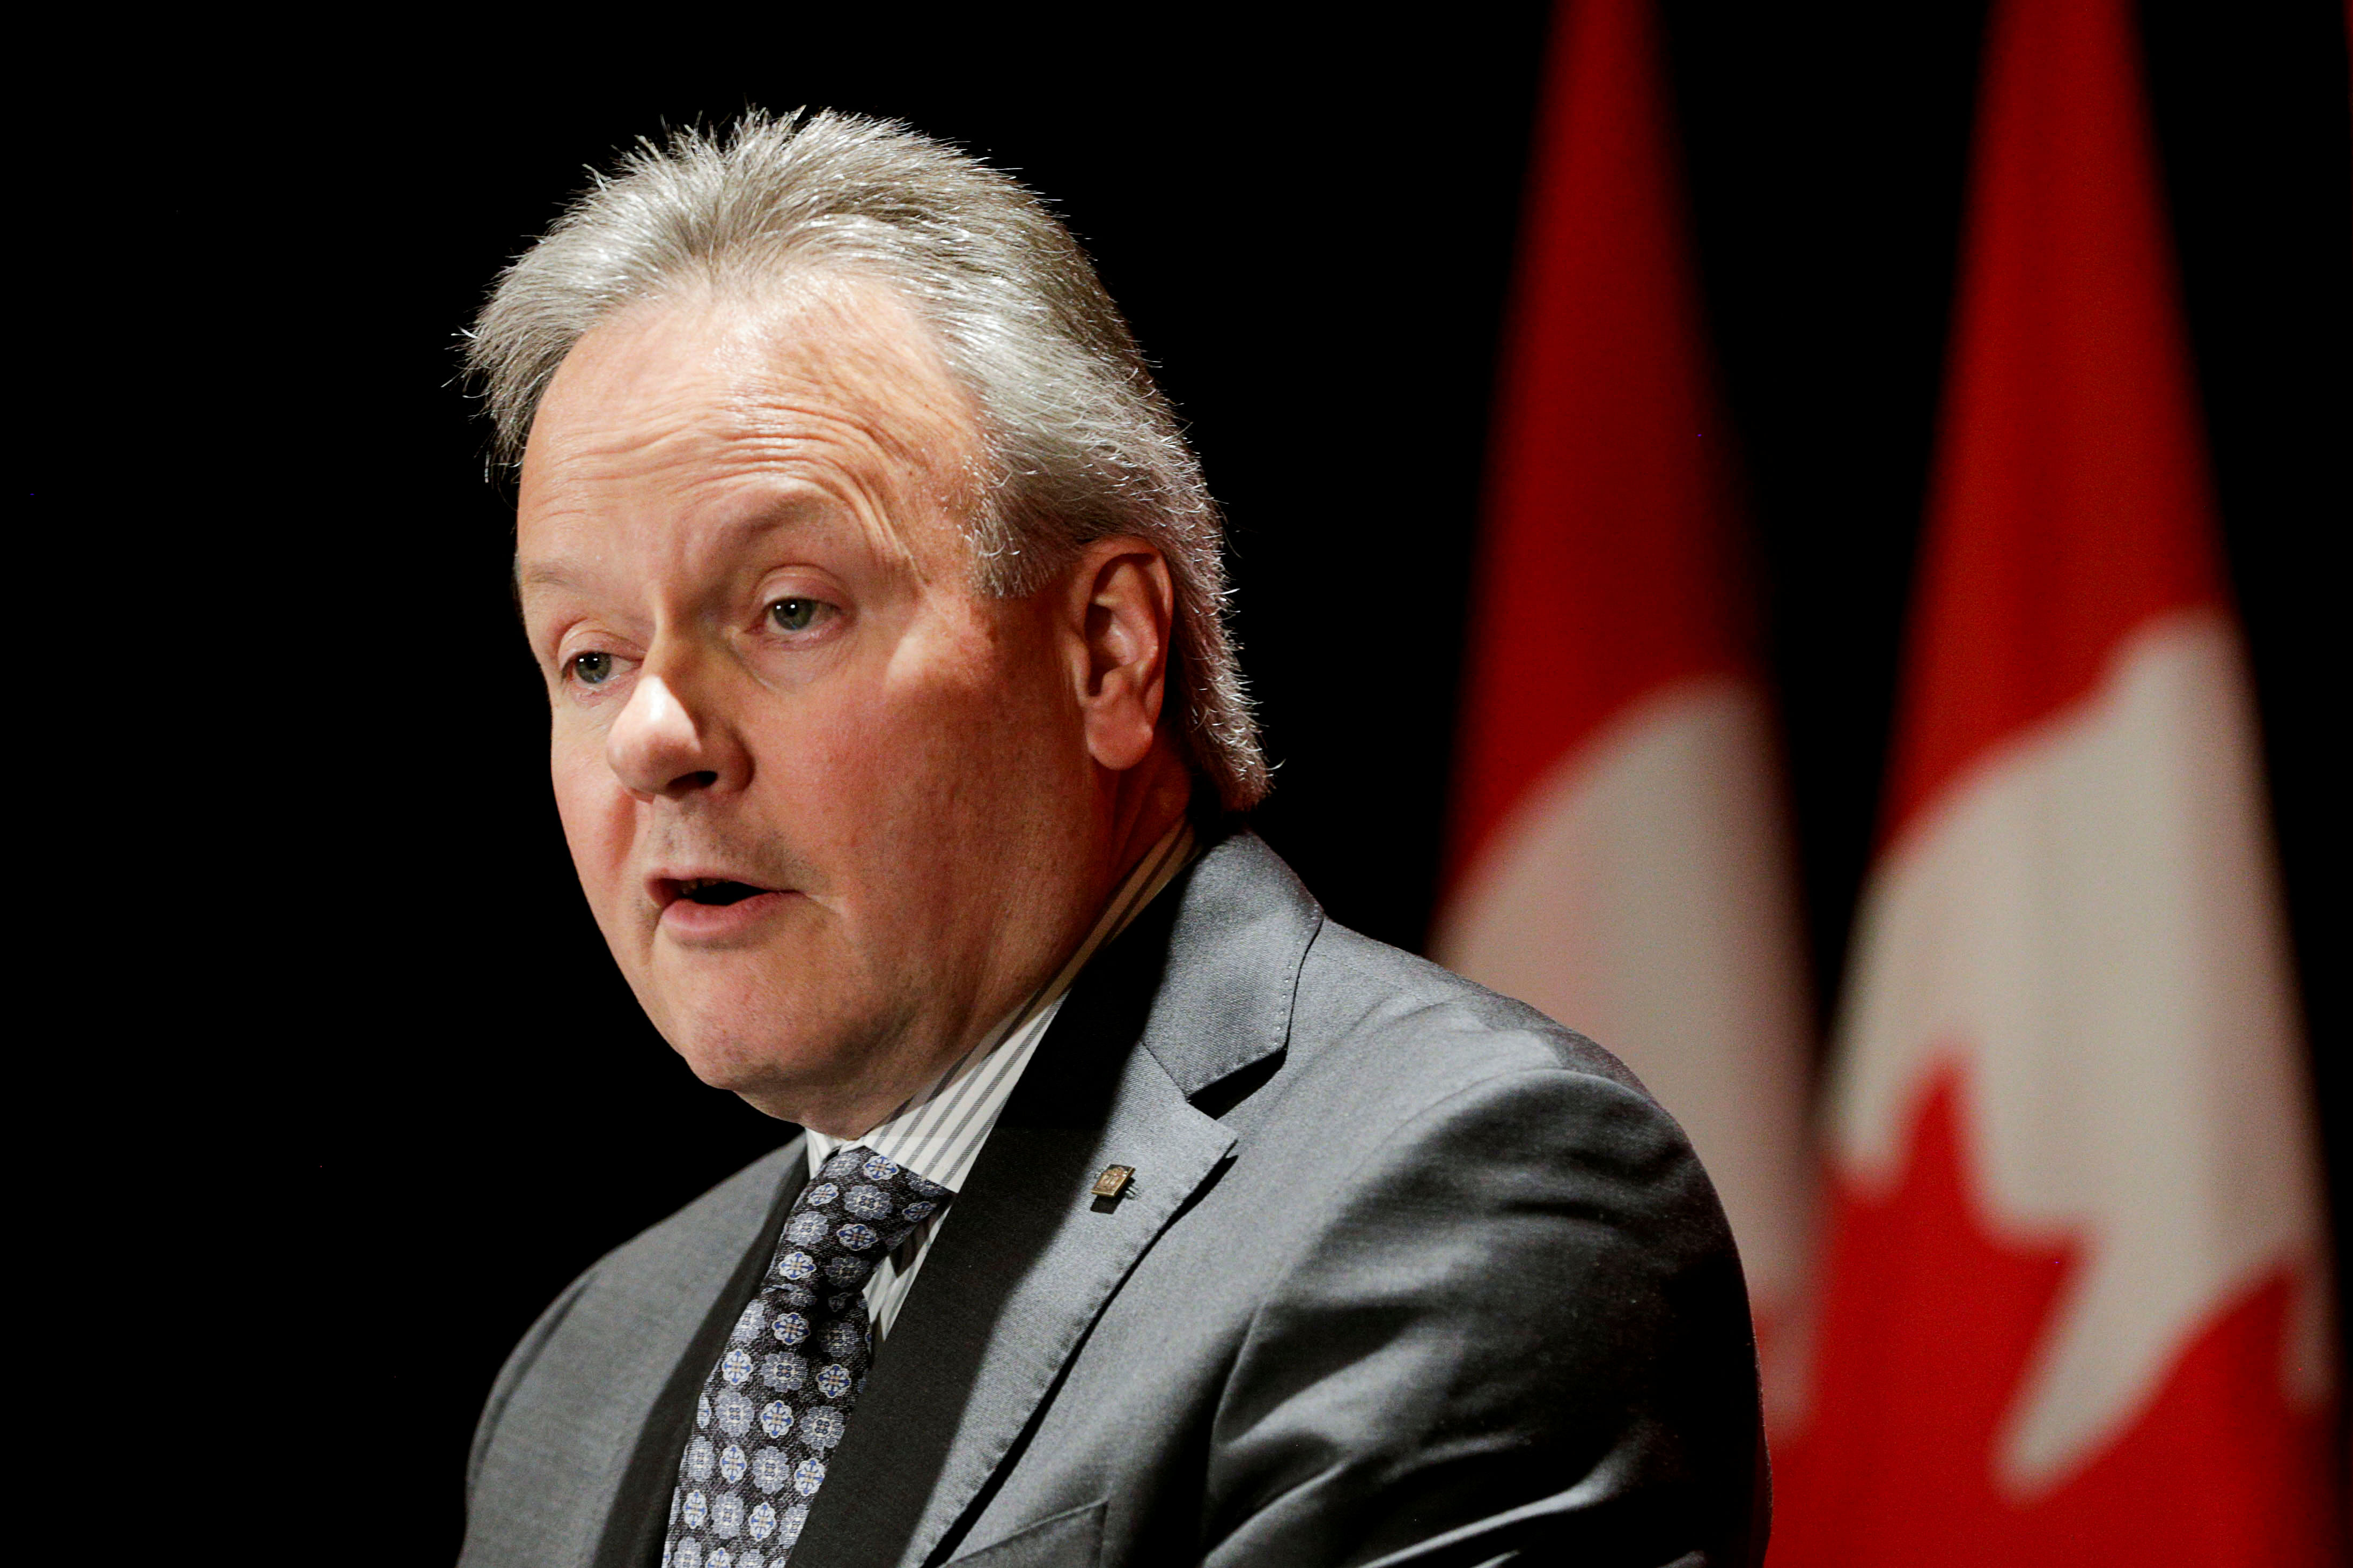 Bank of Canada Governor Stephen Poloz speaks at the Empire Club of Canada in Toronto. (Reuters Photo)